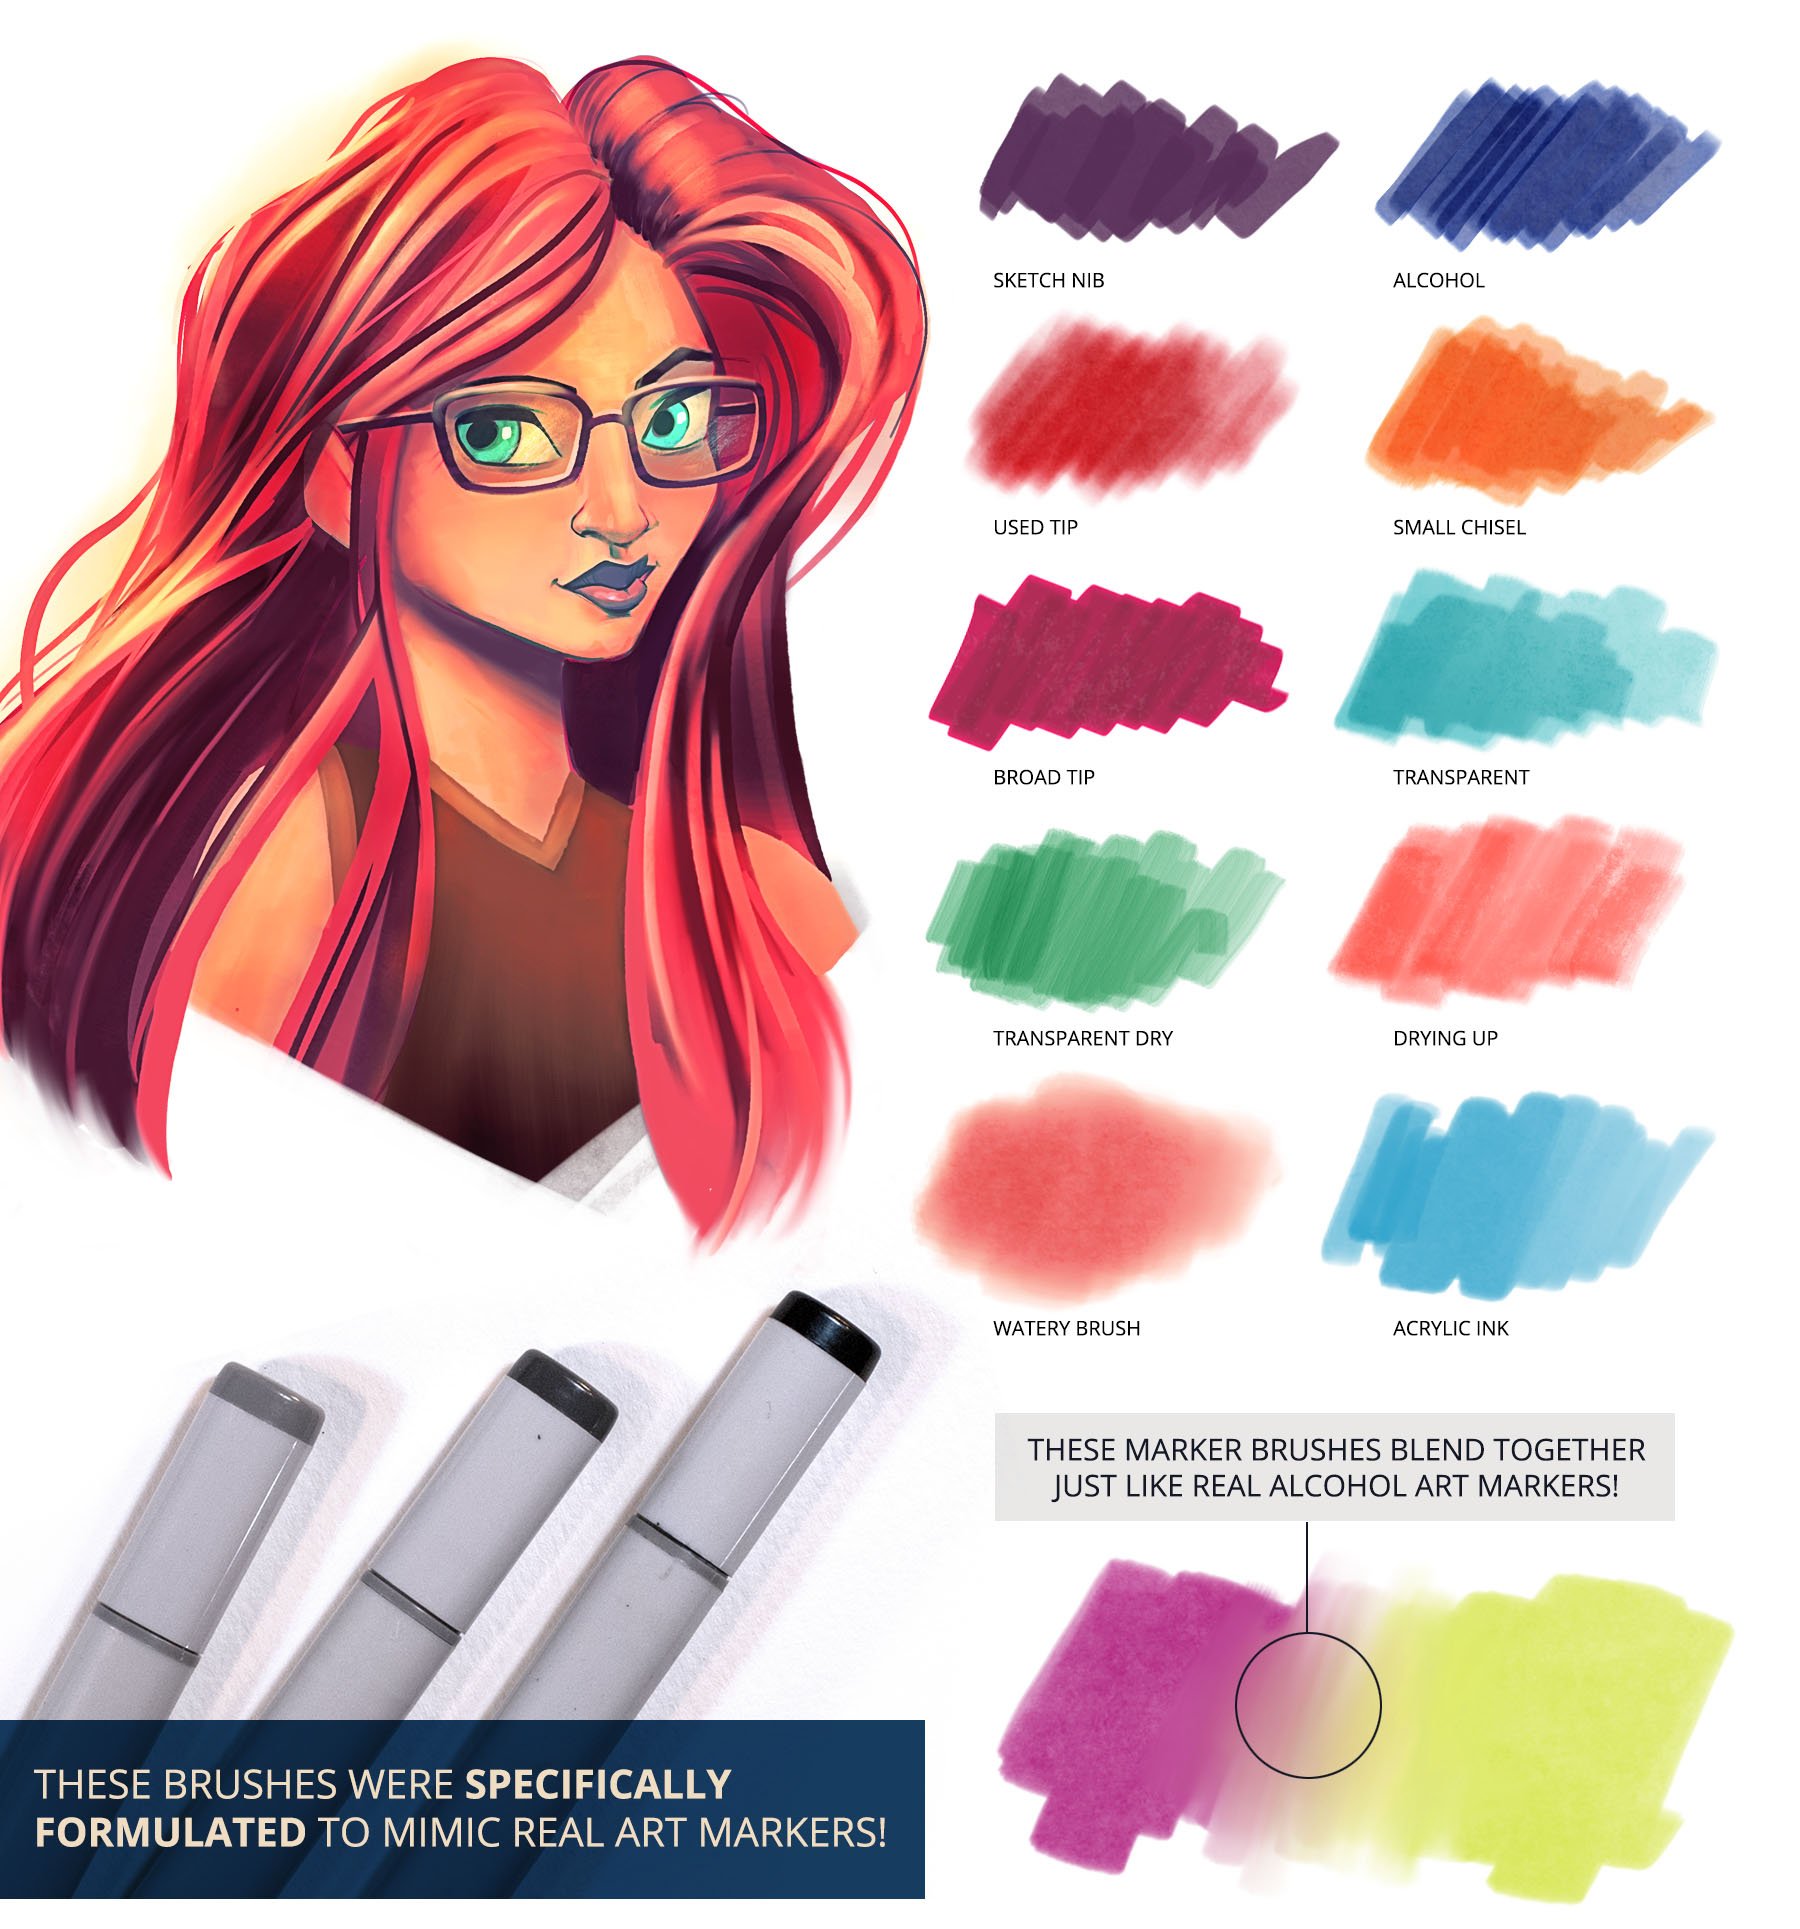 Ultimate Brush Toolbox - Markers